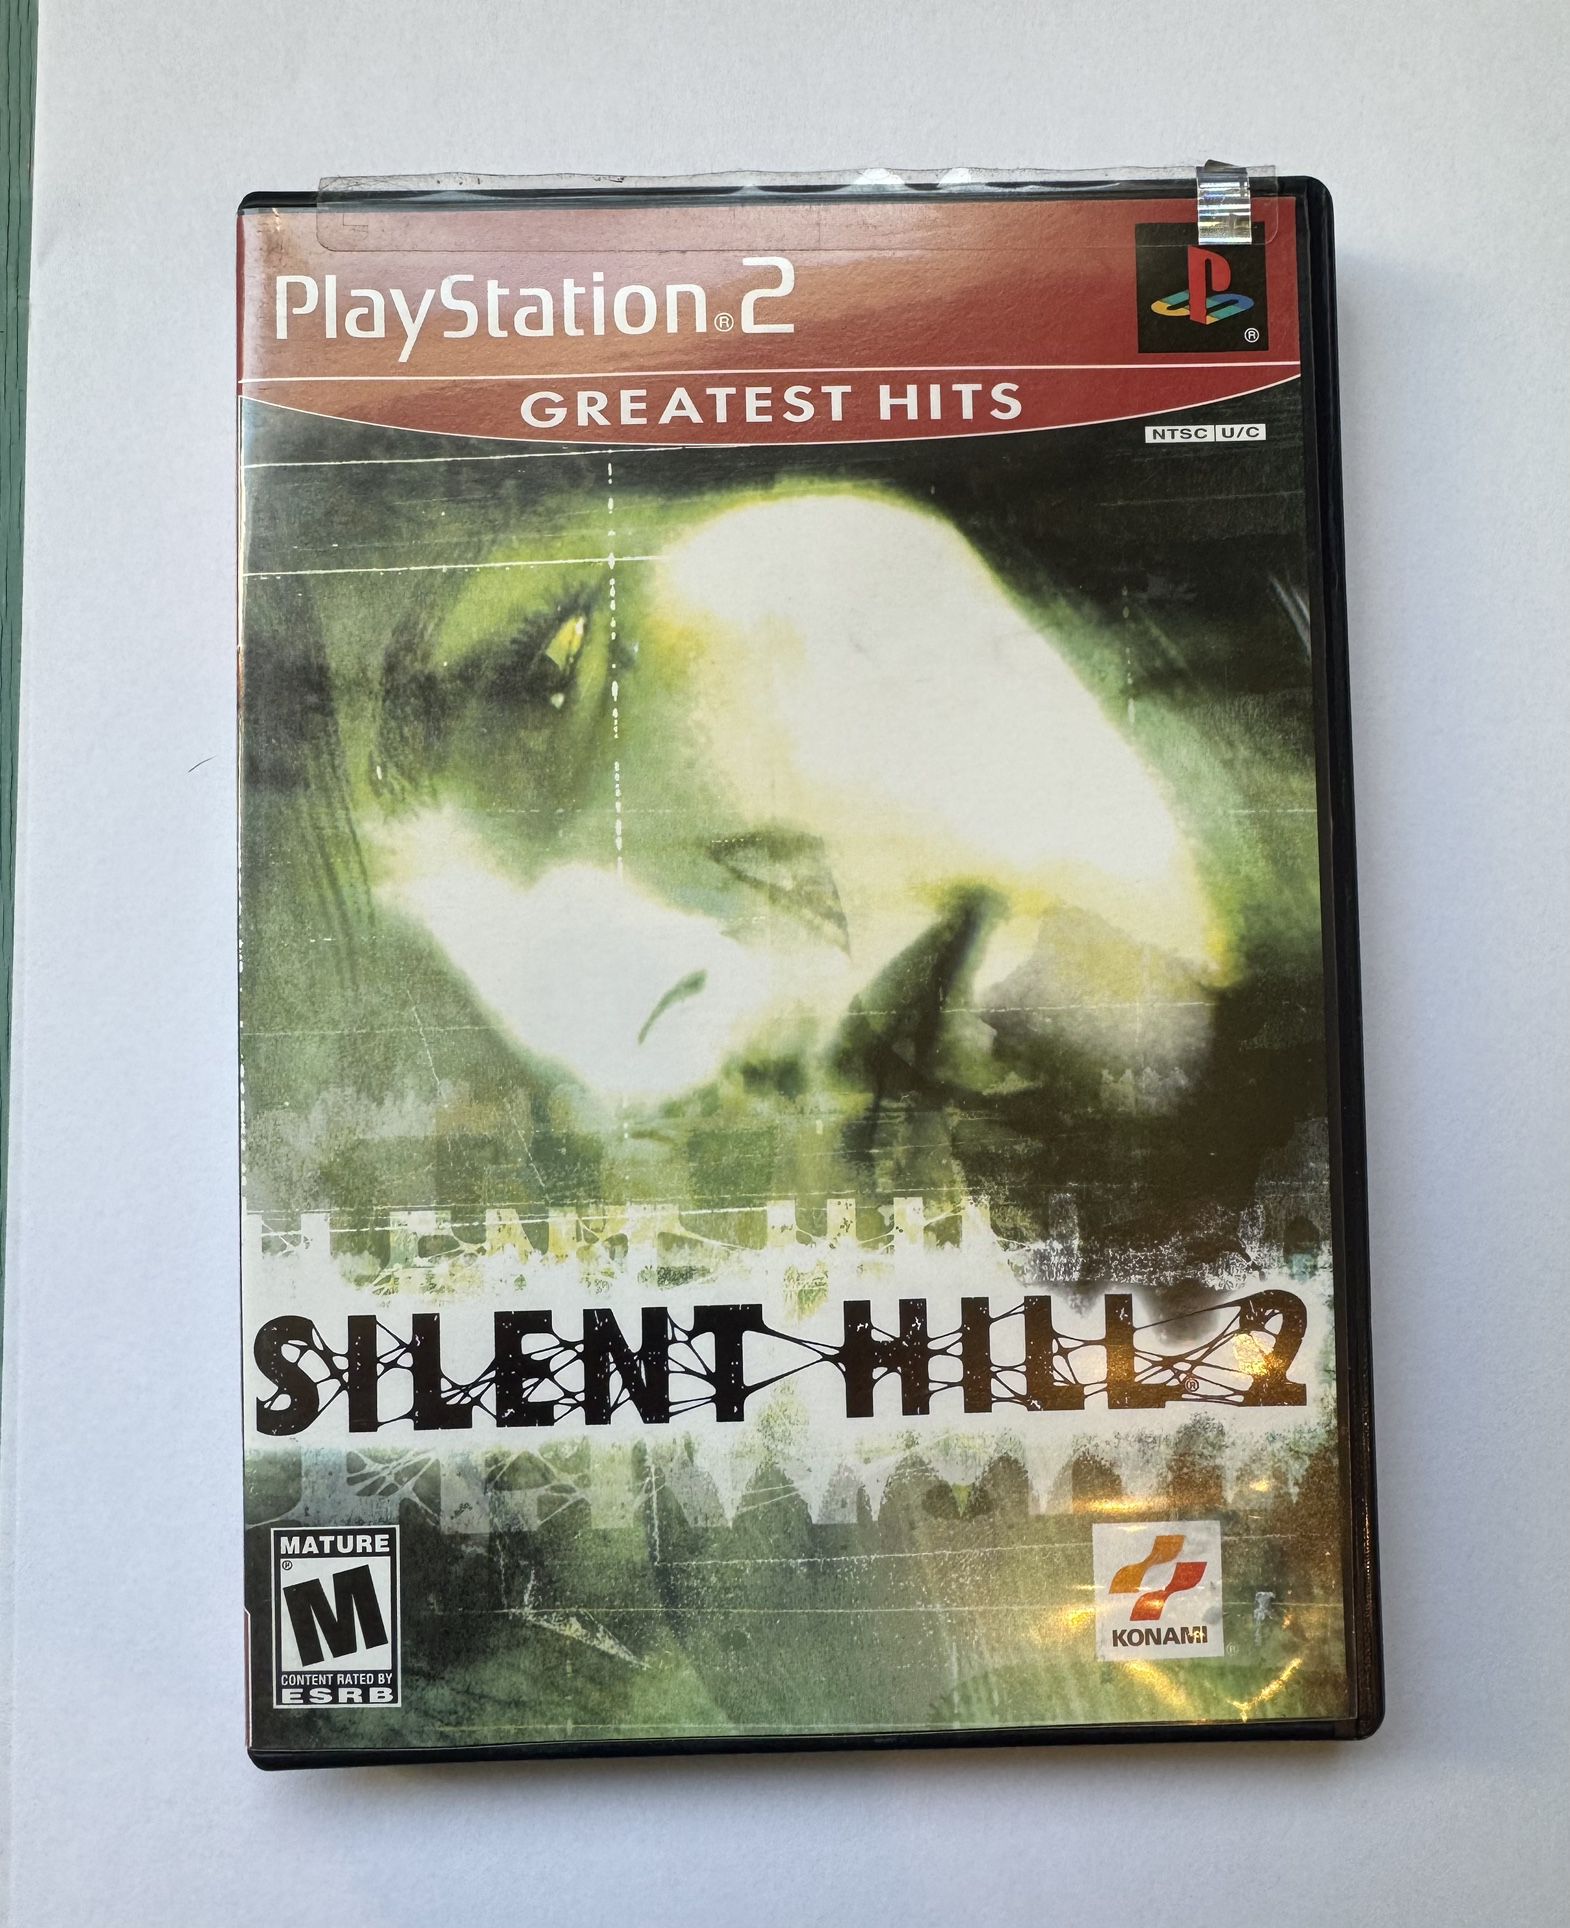 Silent Hill 2 PS2